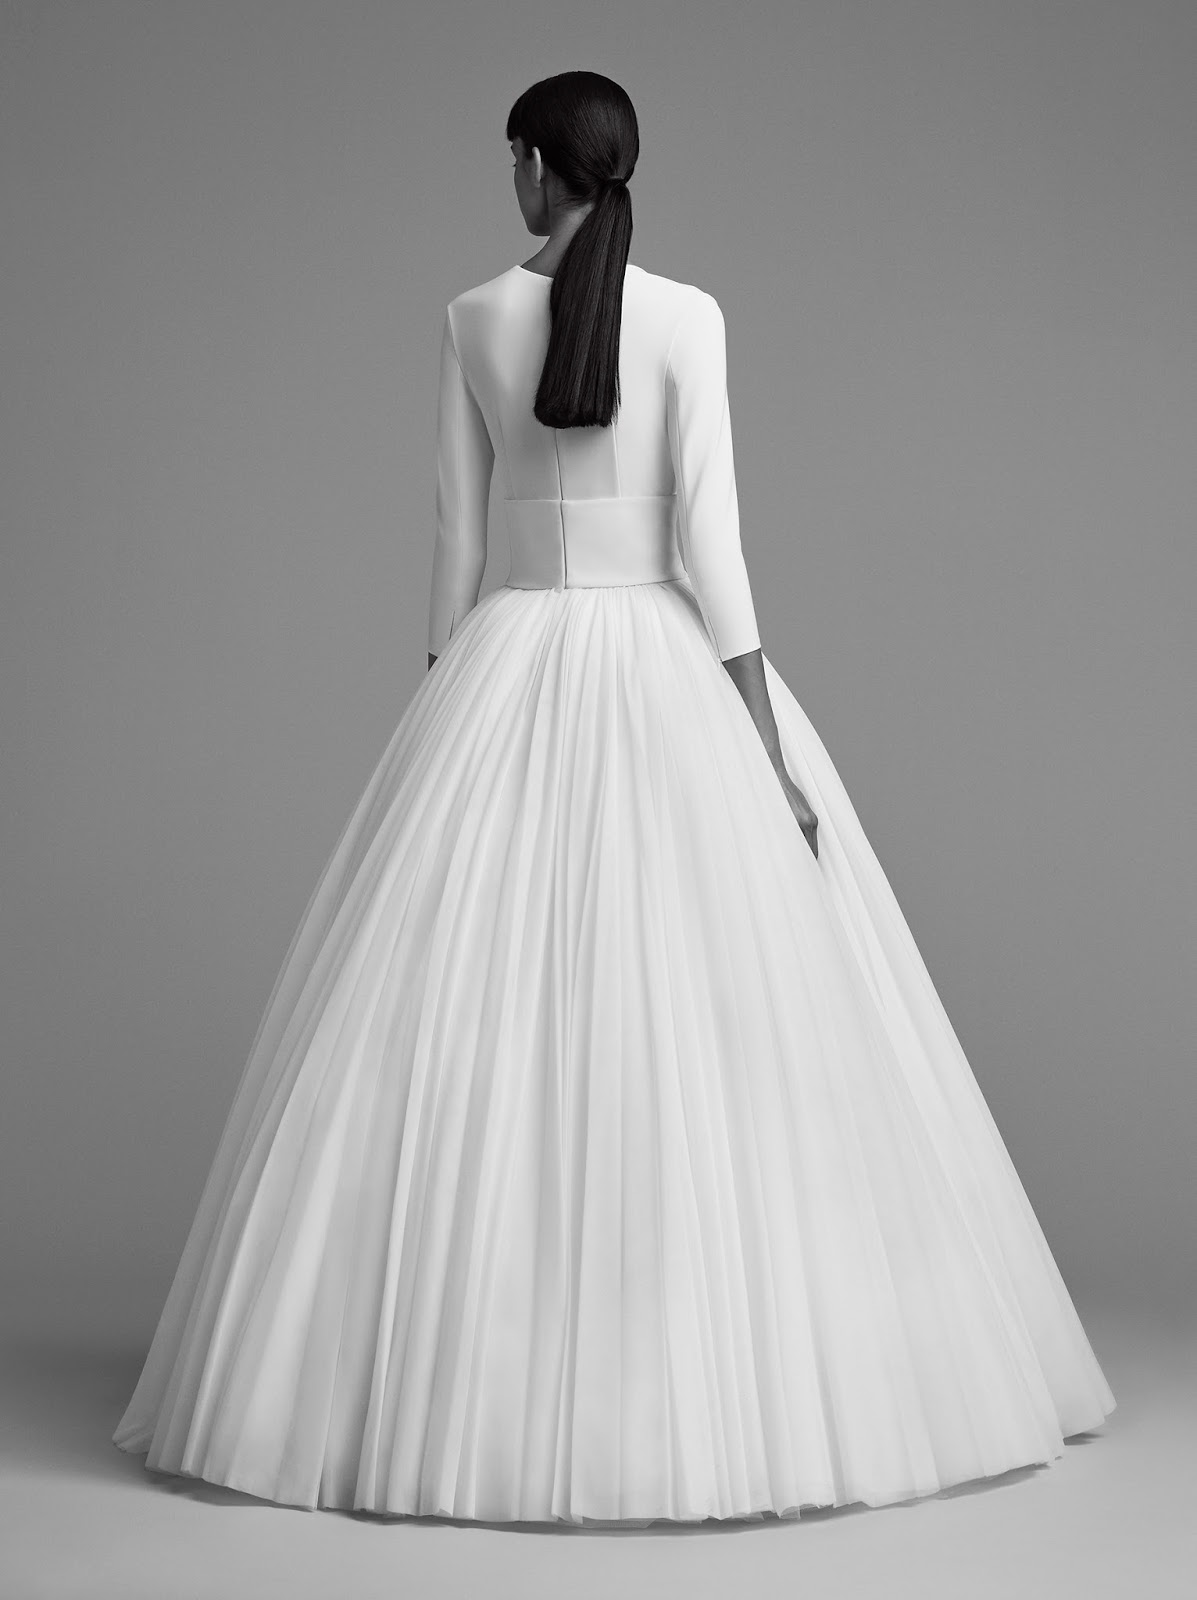 Simply Exquisite Bridal Collection: Viktor and Rolf